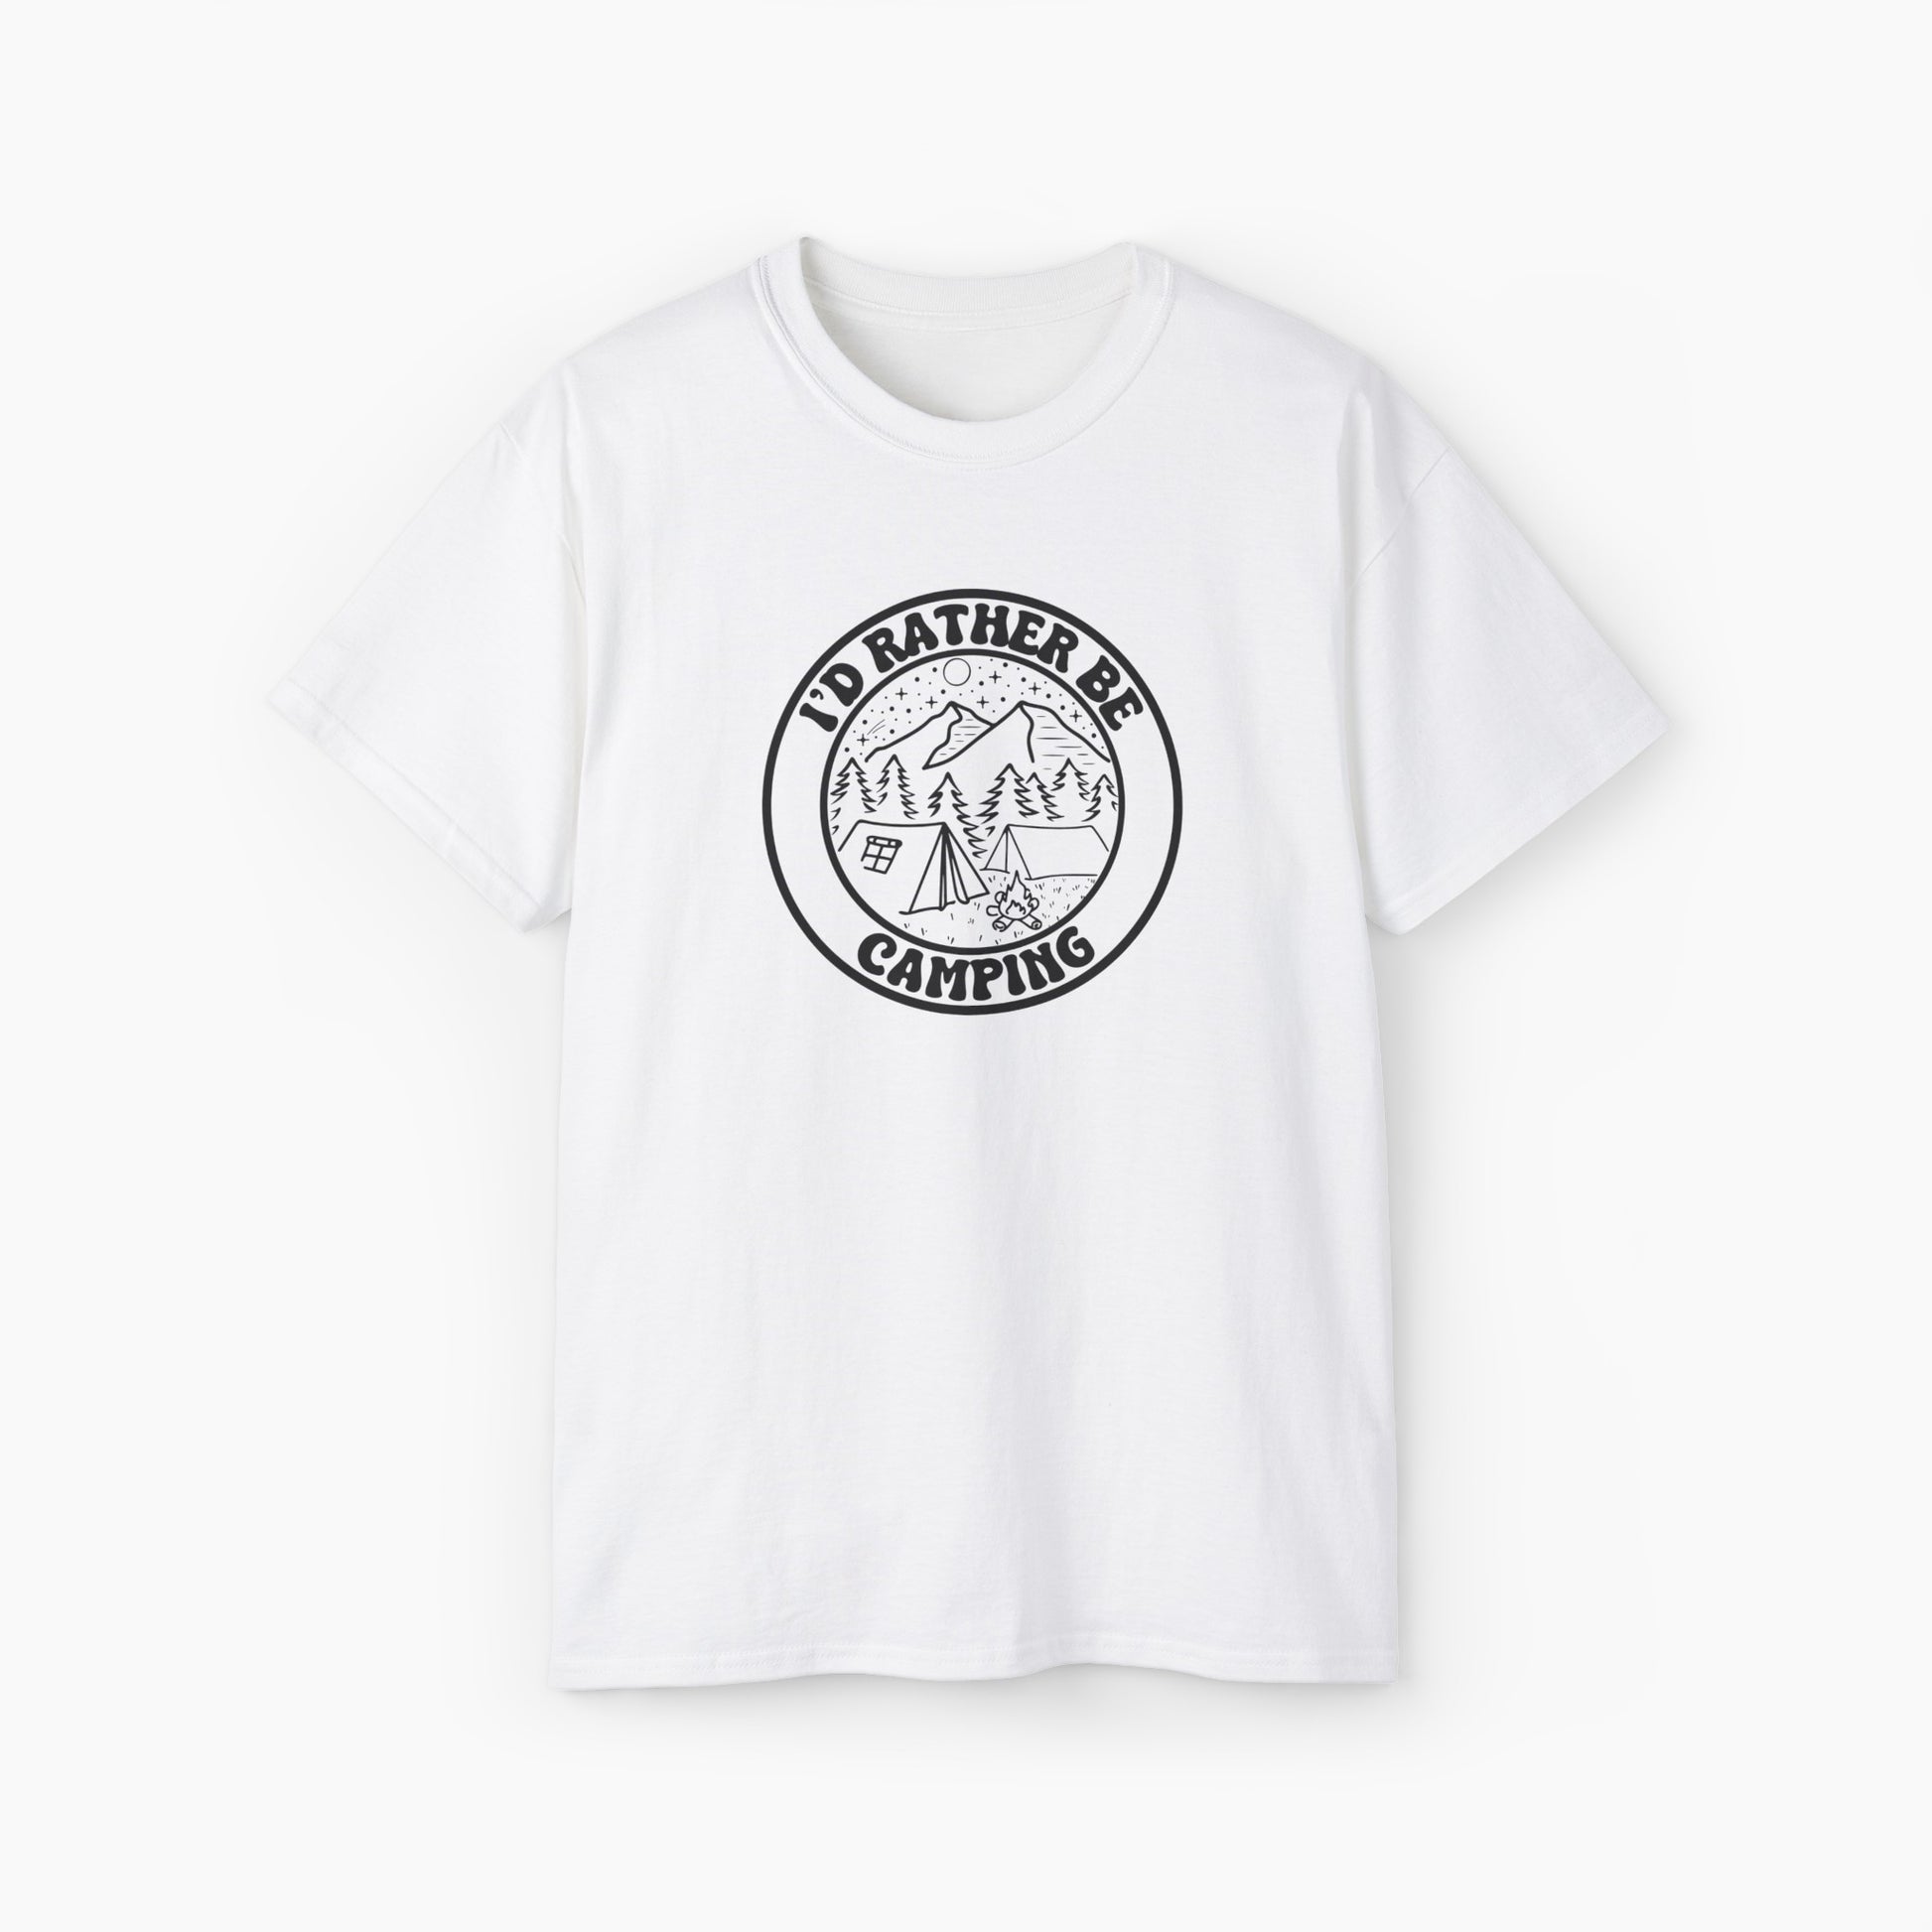 White t-shirt featuring a minimalistic circular design with the text 'I'd rather be camping,' including a tent, campfire, trees, and mountains.